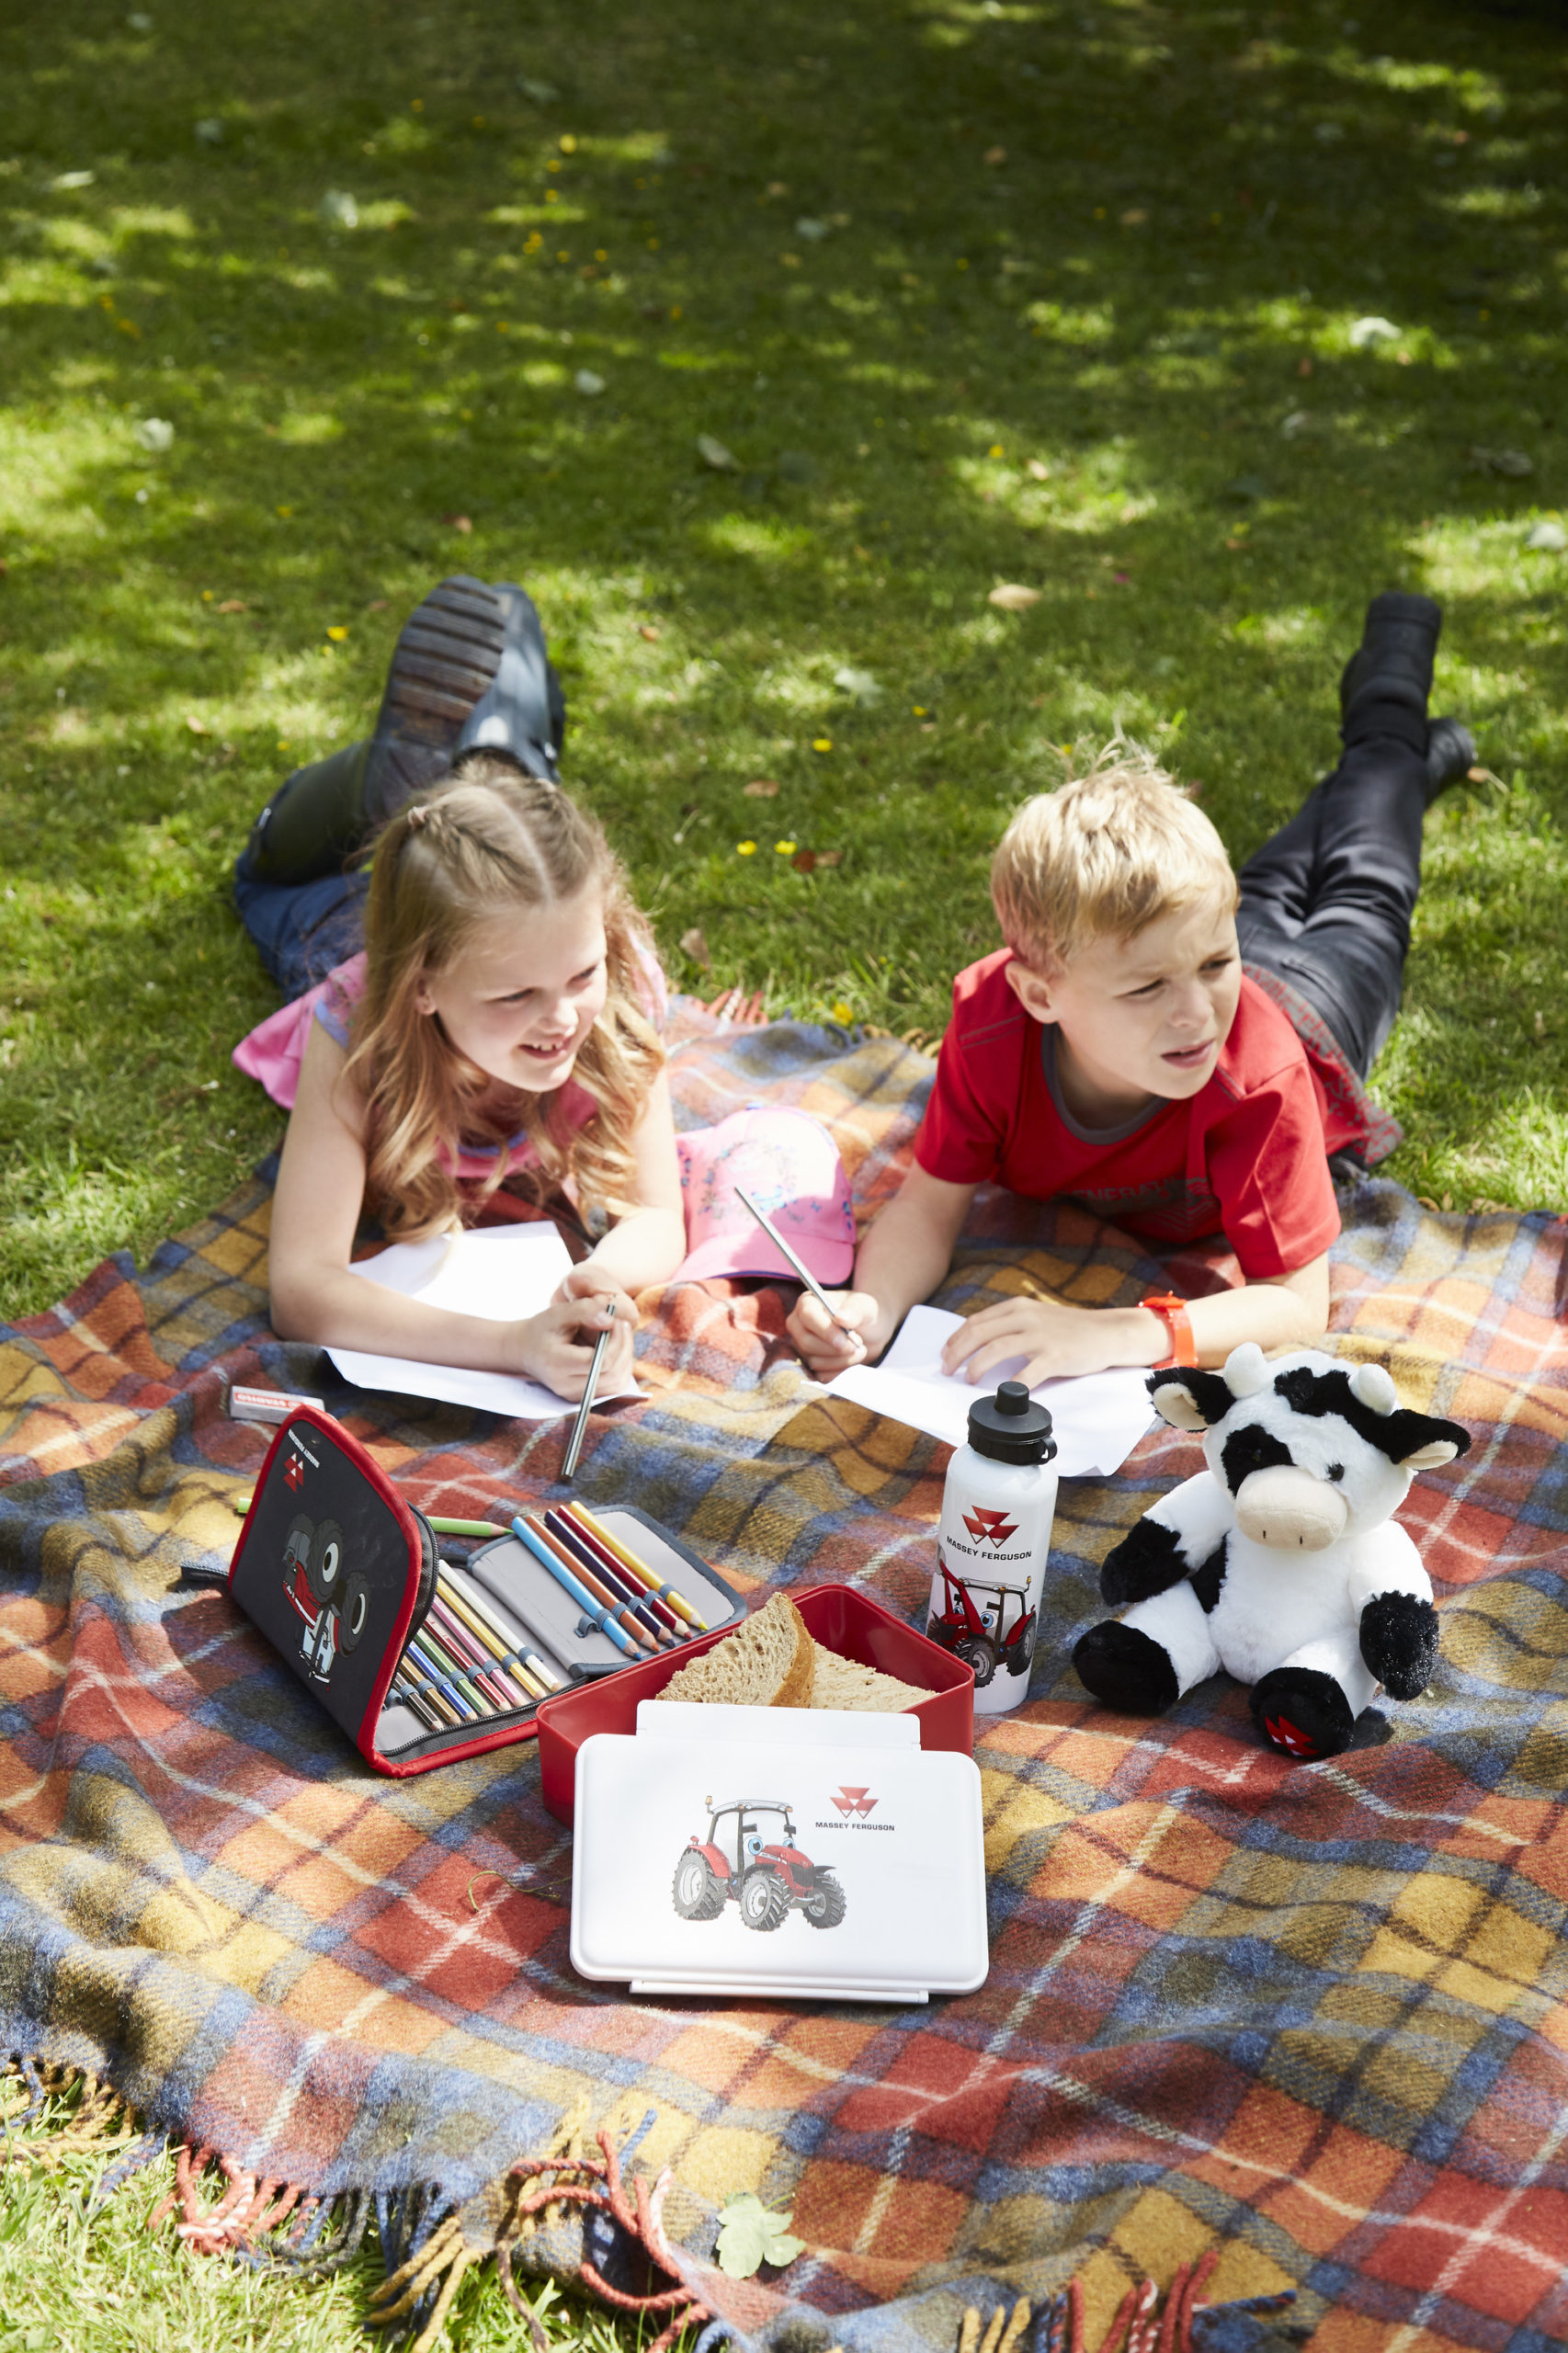 Children's gifts from Massey Ferguson and Fendt